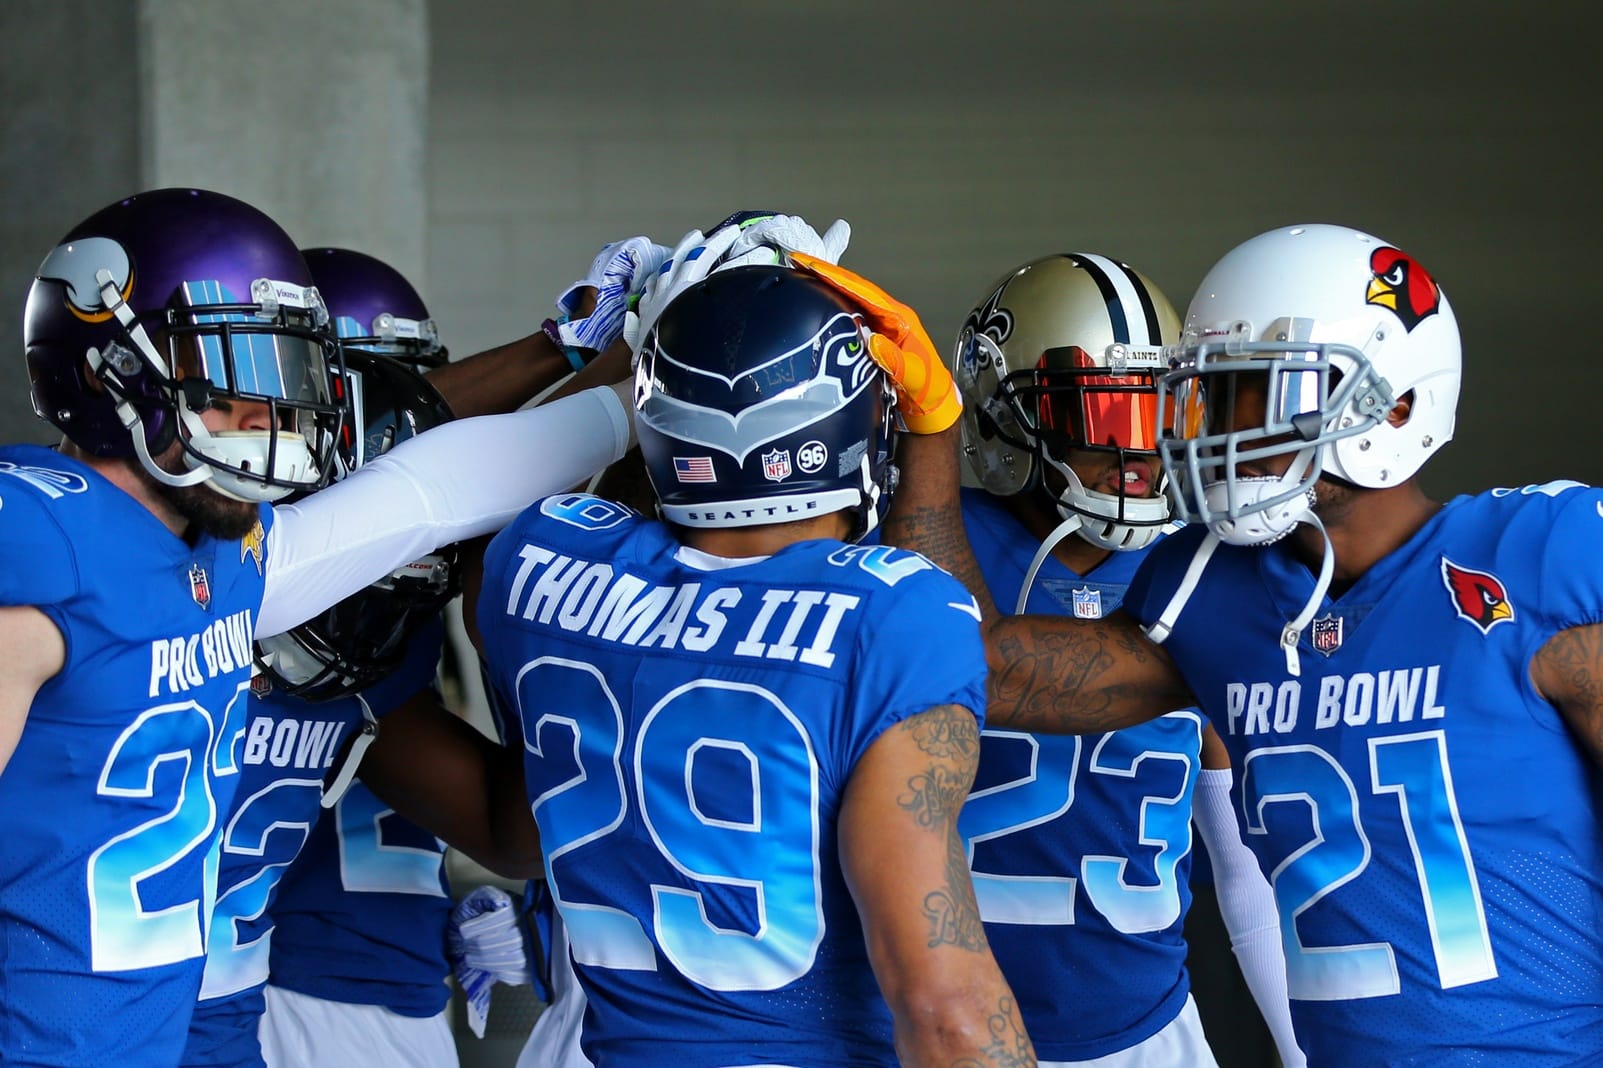 NFL players in Pro Bowl have plenty of incentive to win